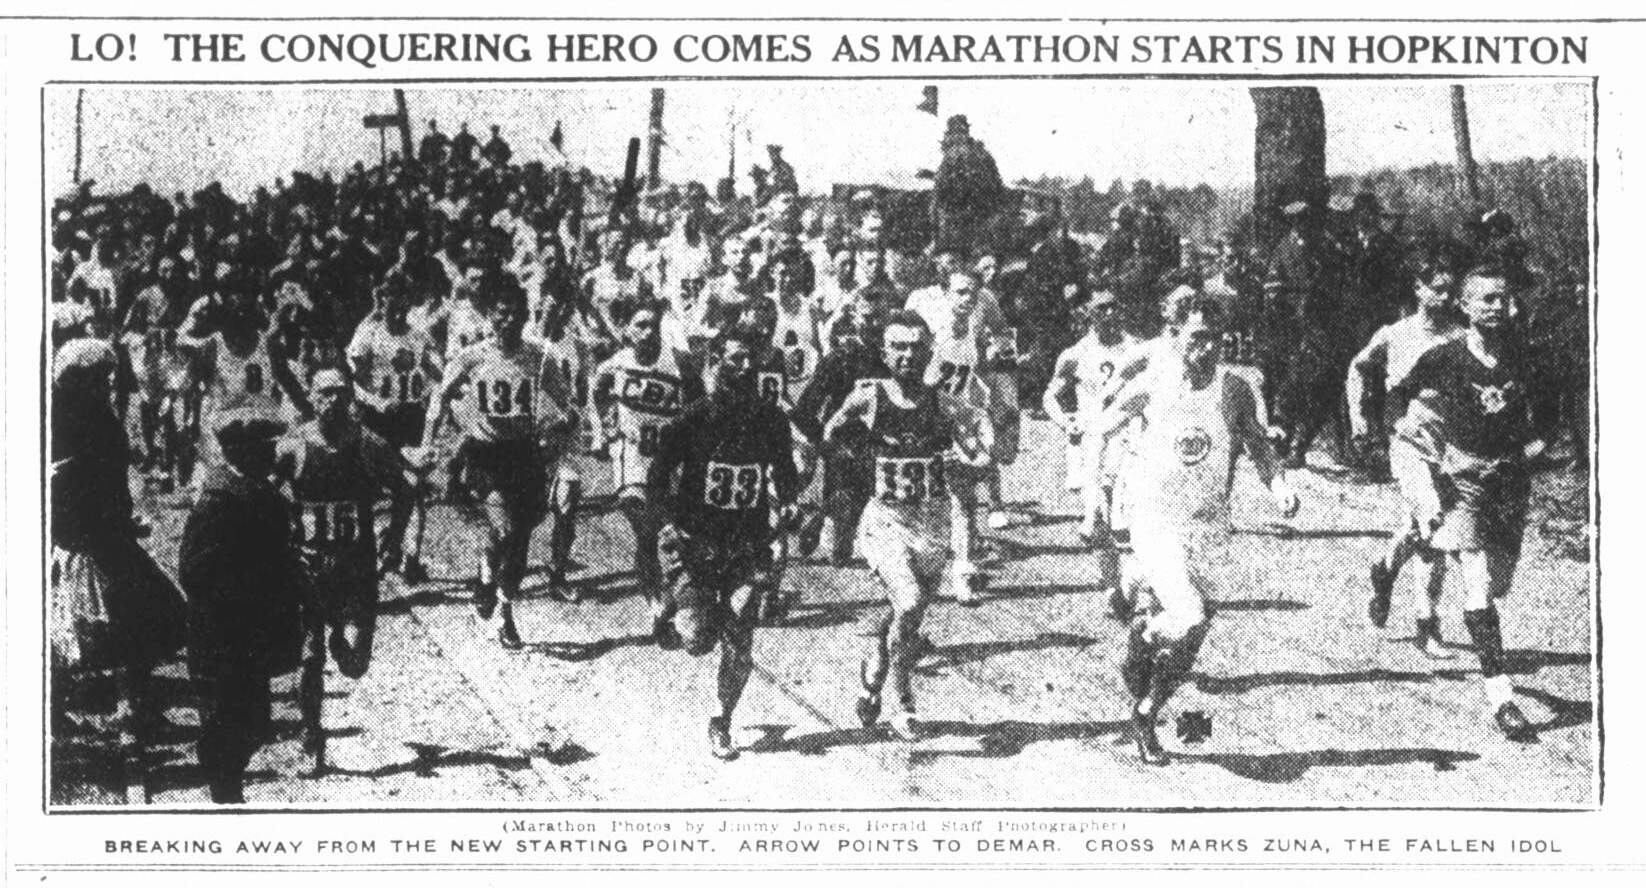 An image of runners racing away from the new Boston Marathon starting line in Hopkinton featured in the Boston Herald april 20, 1924. (Boston Public Library)